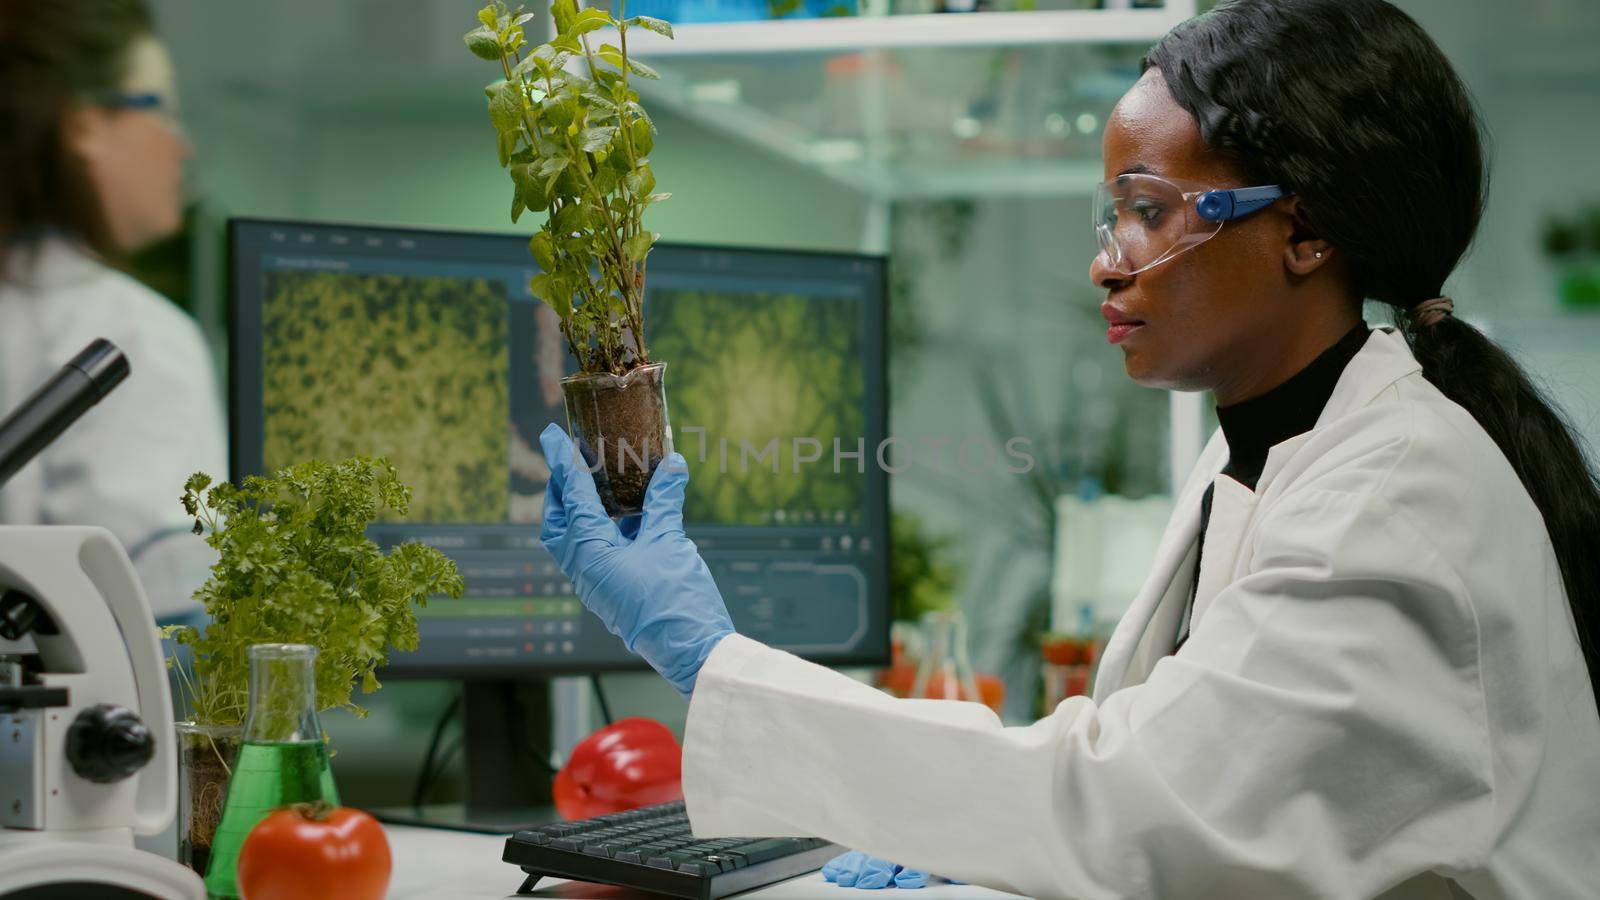 Woman researcher looking at green sapling comparing with tomato while typing on keyboard ecology expertise. Scientist observing genetic mutation on plants, working in agriculture laboratory